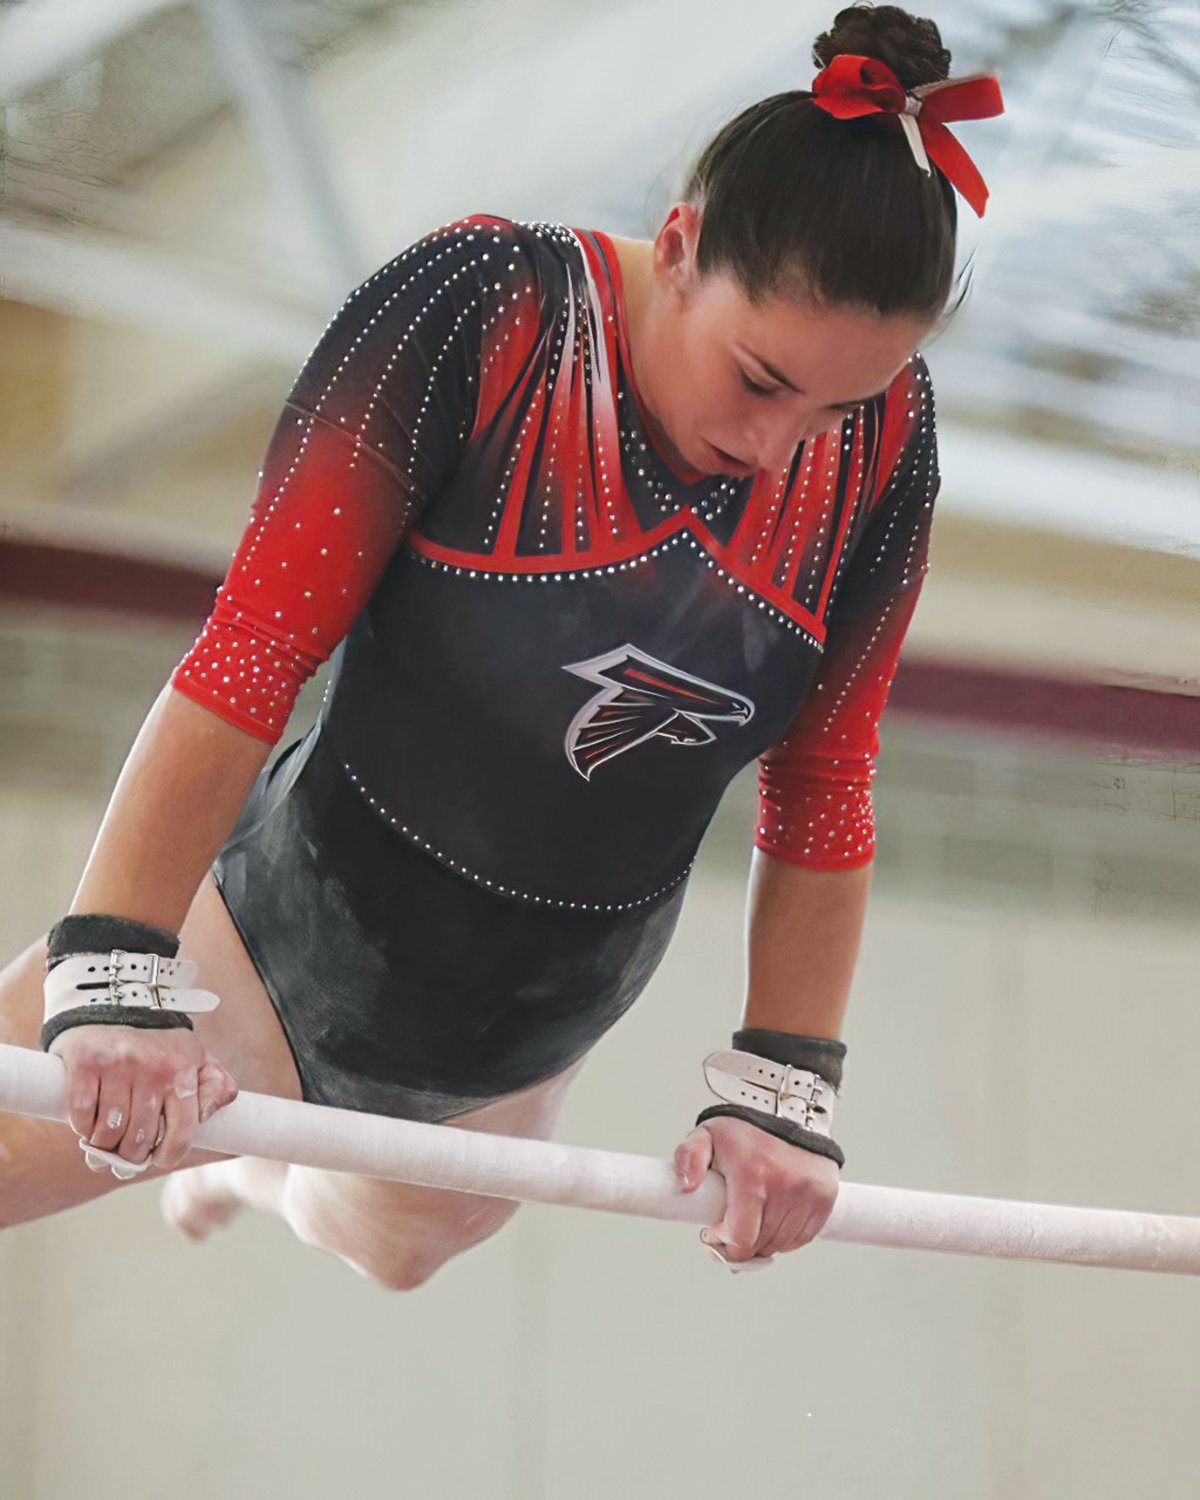 NEW ENGLAND CHAMP: Brooke Anderson competes on the bars. (Photos by Mike Zawistoski)